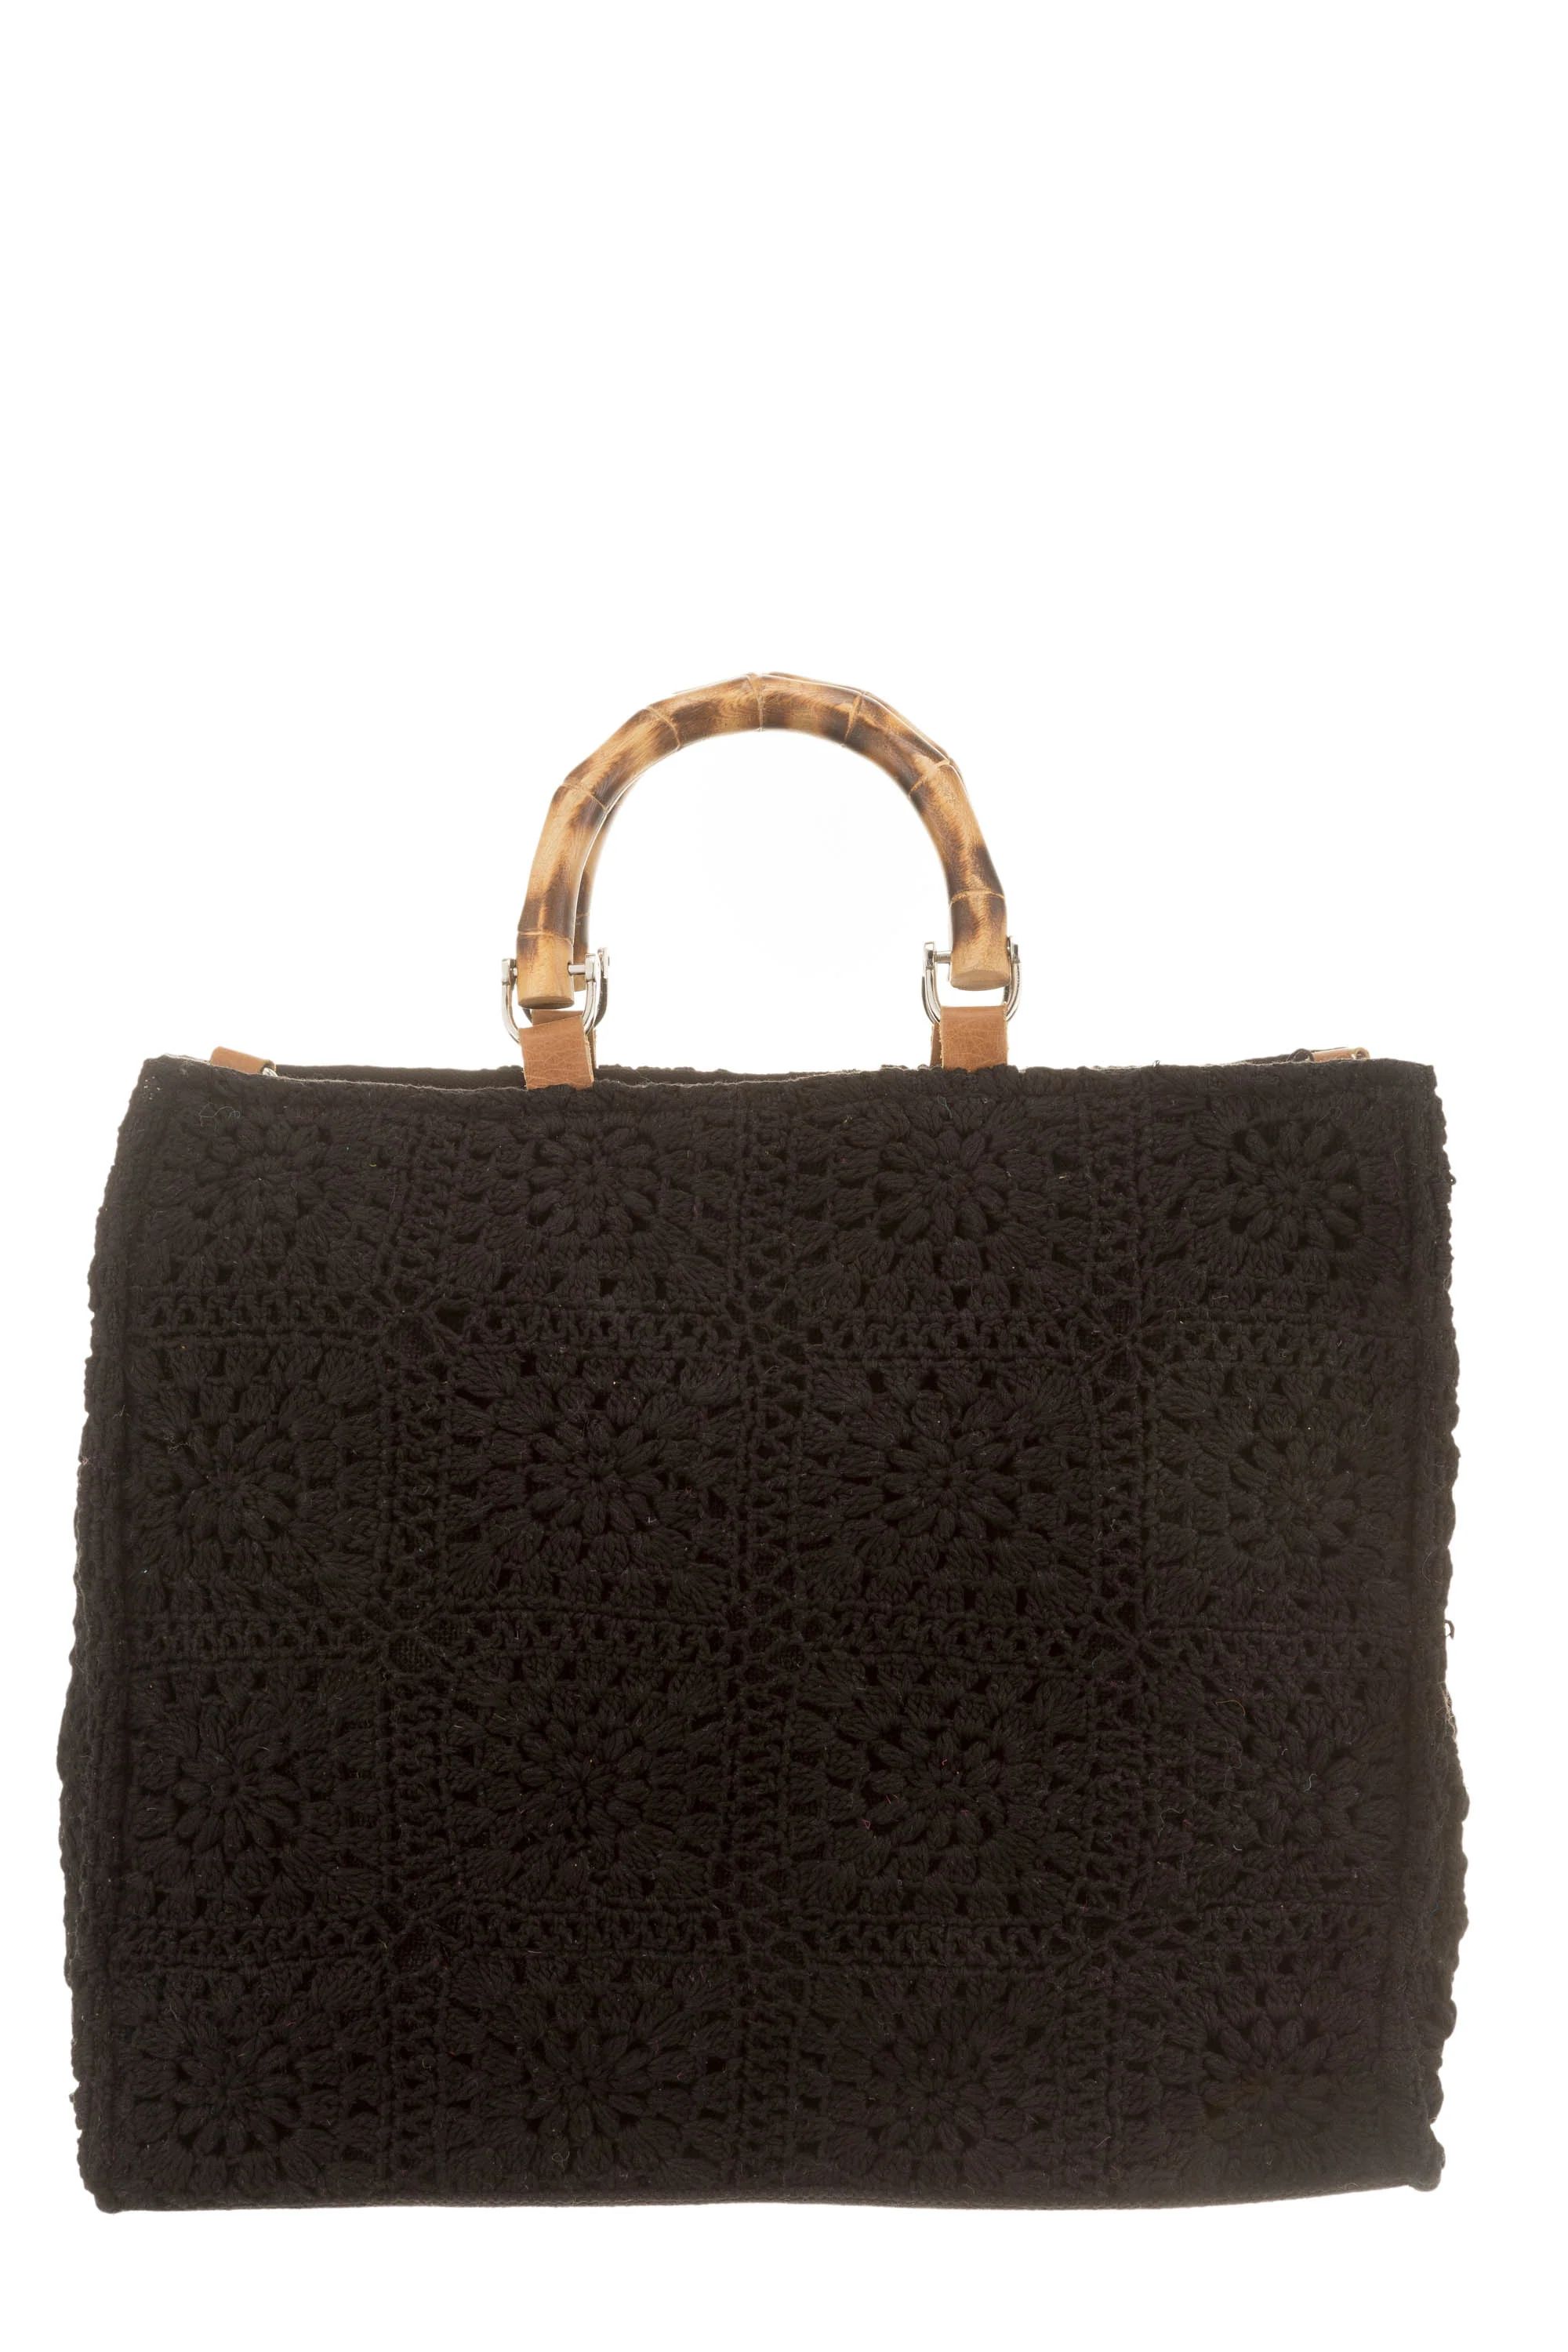 Alex Max Floral Knit Handle Bag in Black Lord & Taylor | Lord & Taylor